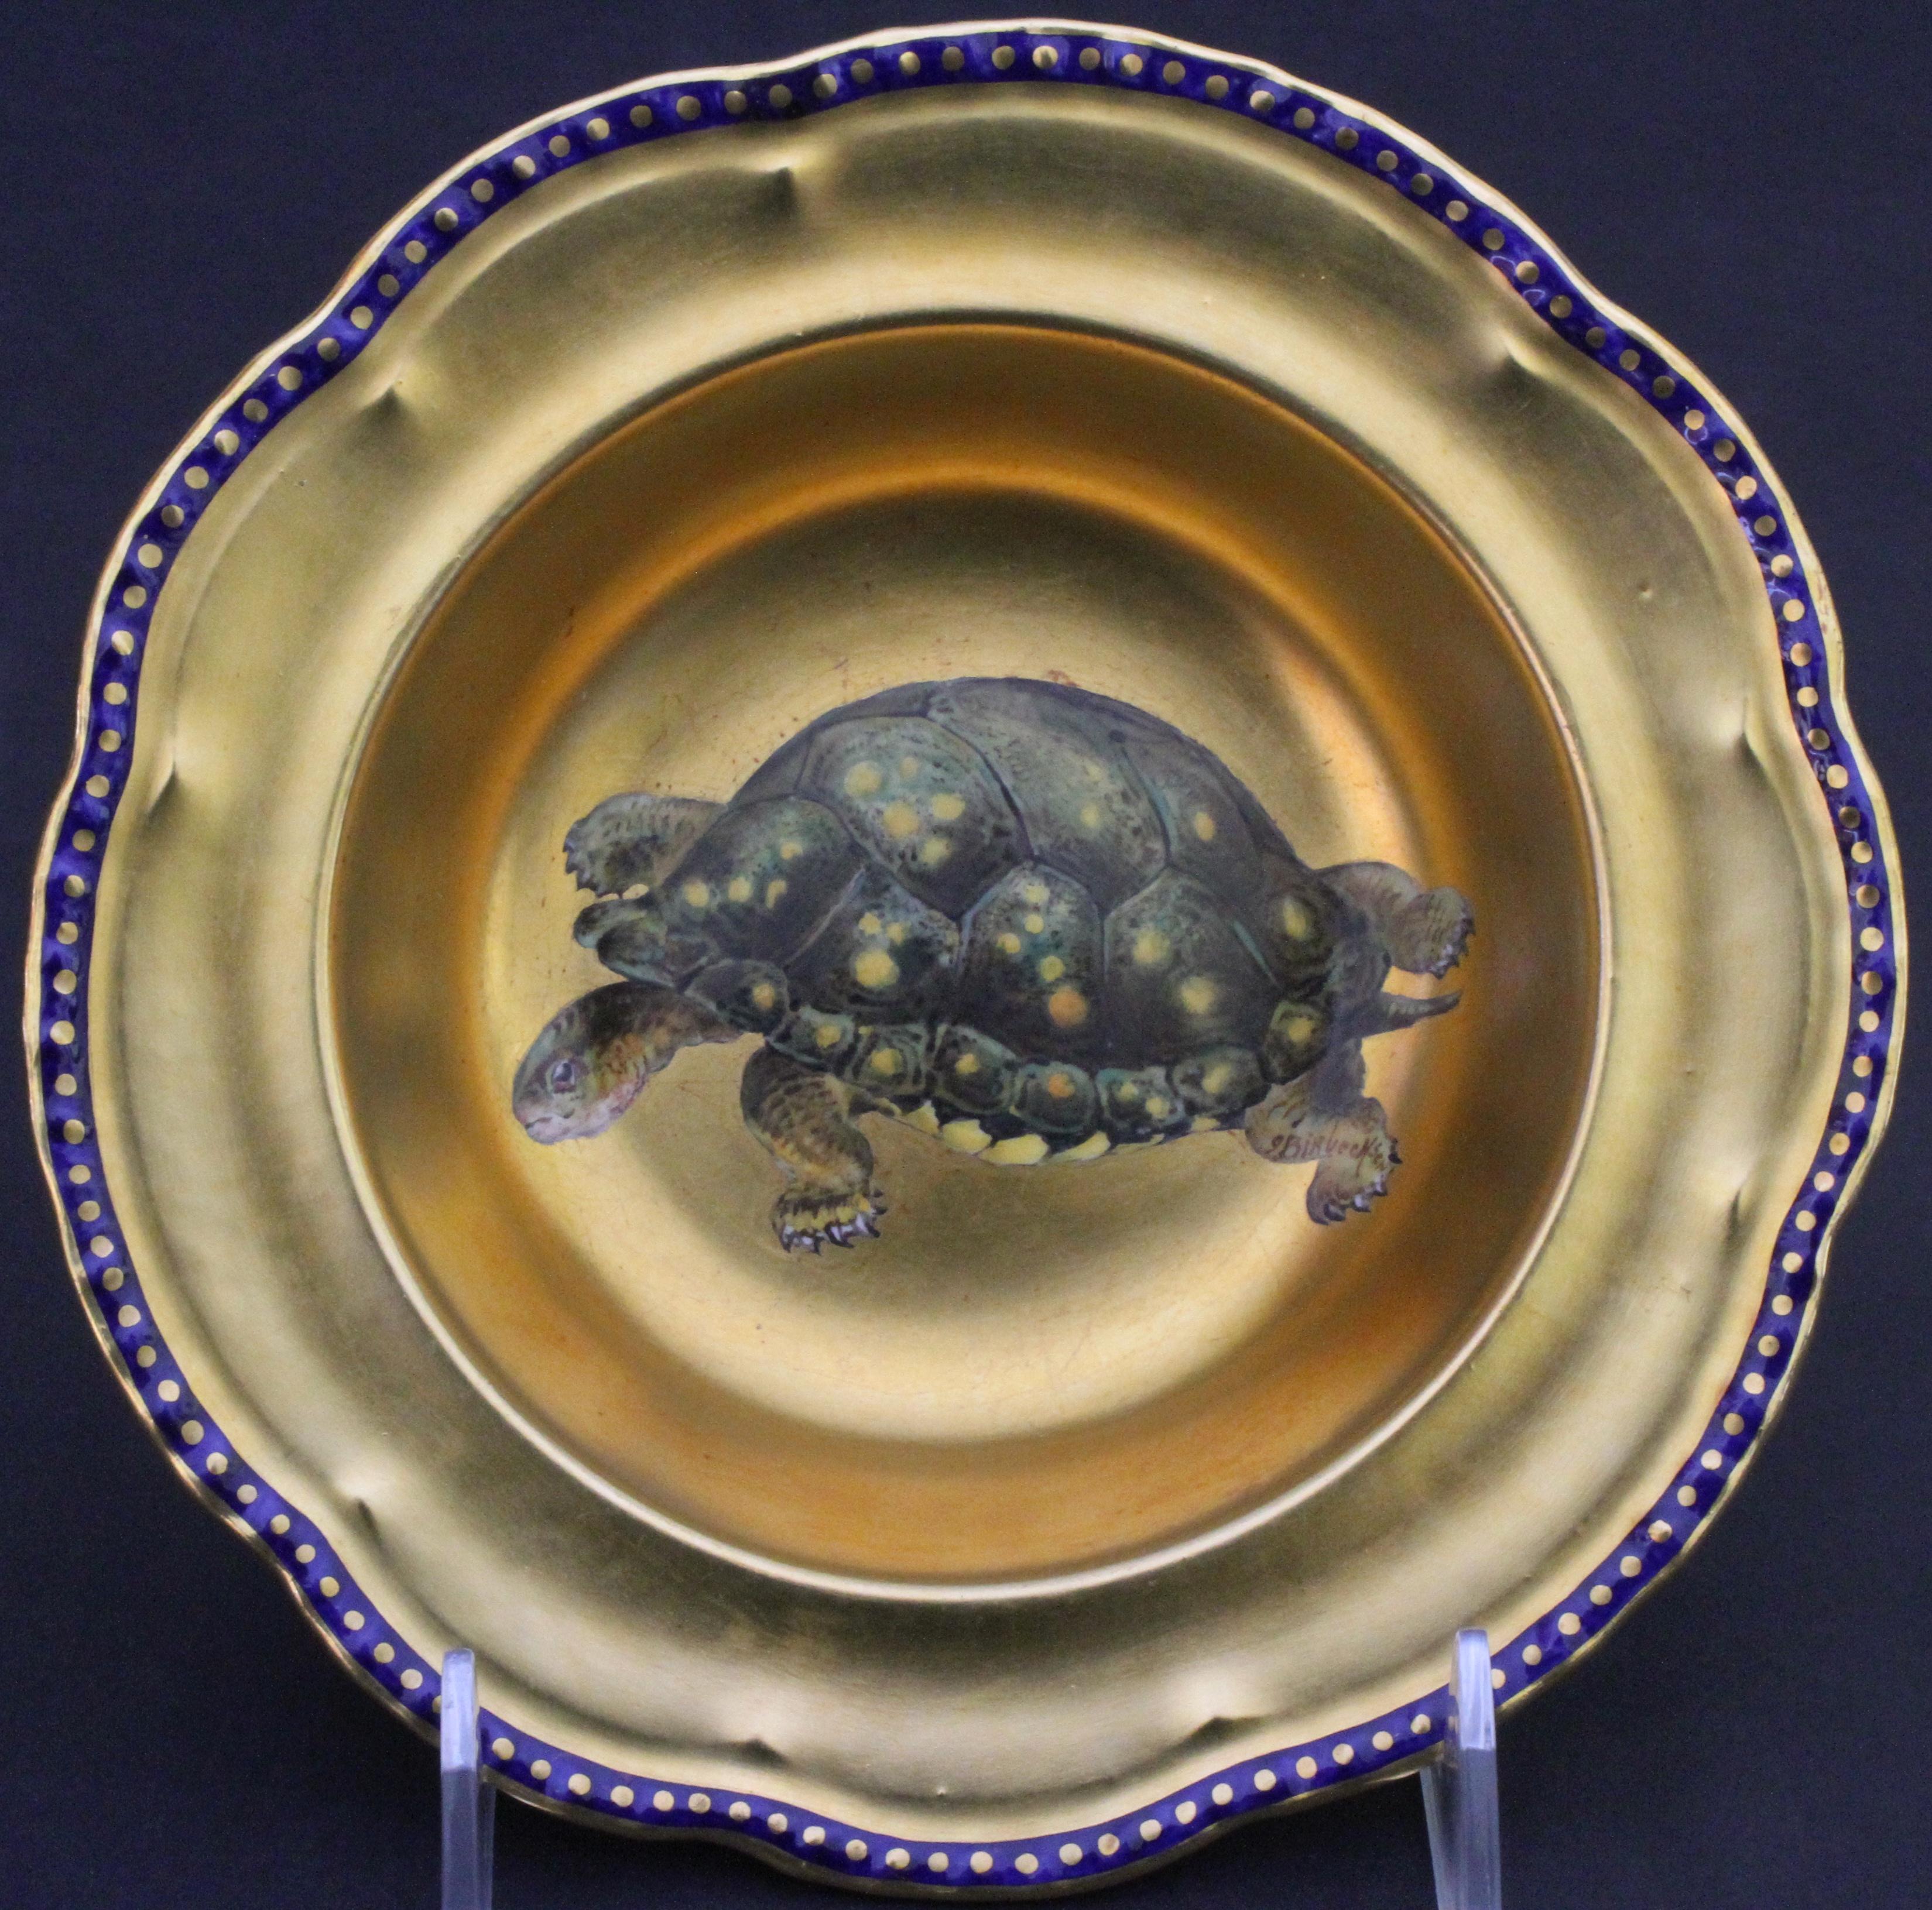 Here is a stunning set of 12 Cauldon, England hand painted turtle, terrapin or tortoise soup bowls. Each bowl features a finely detailed rendering of a turtle, terrapin or tortoise in a naturalistic aquatic setting. The bowls are completely